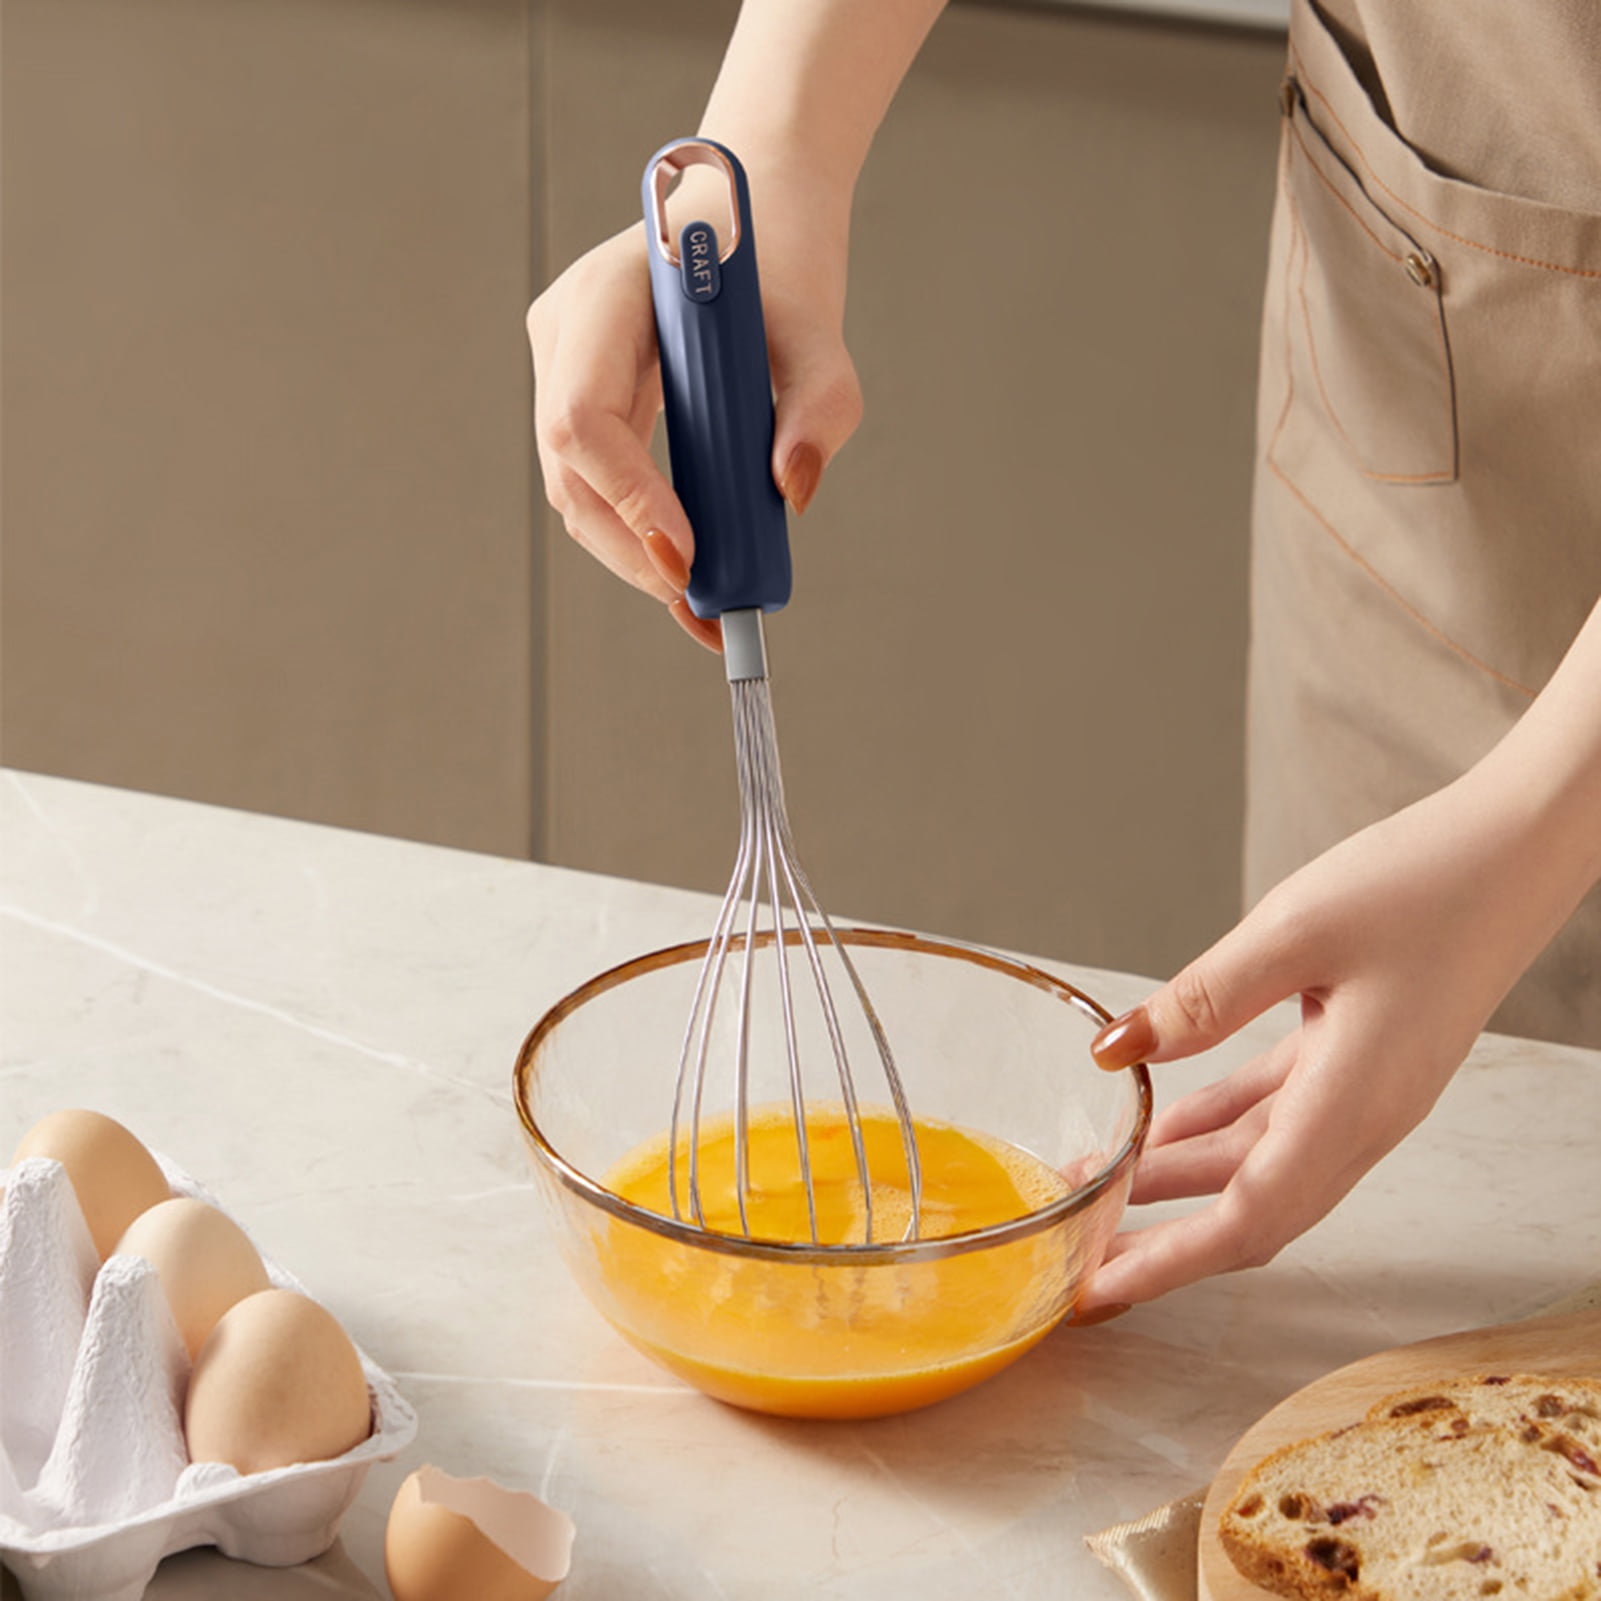 2-In-1 Silicone Whisk,2-In-1 Flat and Balloon Collapsible Twist Whisk Egg  Beater Silicone Rotating Collapsible Kitchen Whisk,Twist Whisk,Plastic Flat